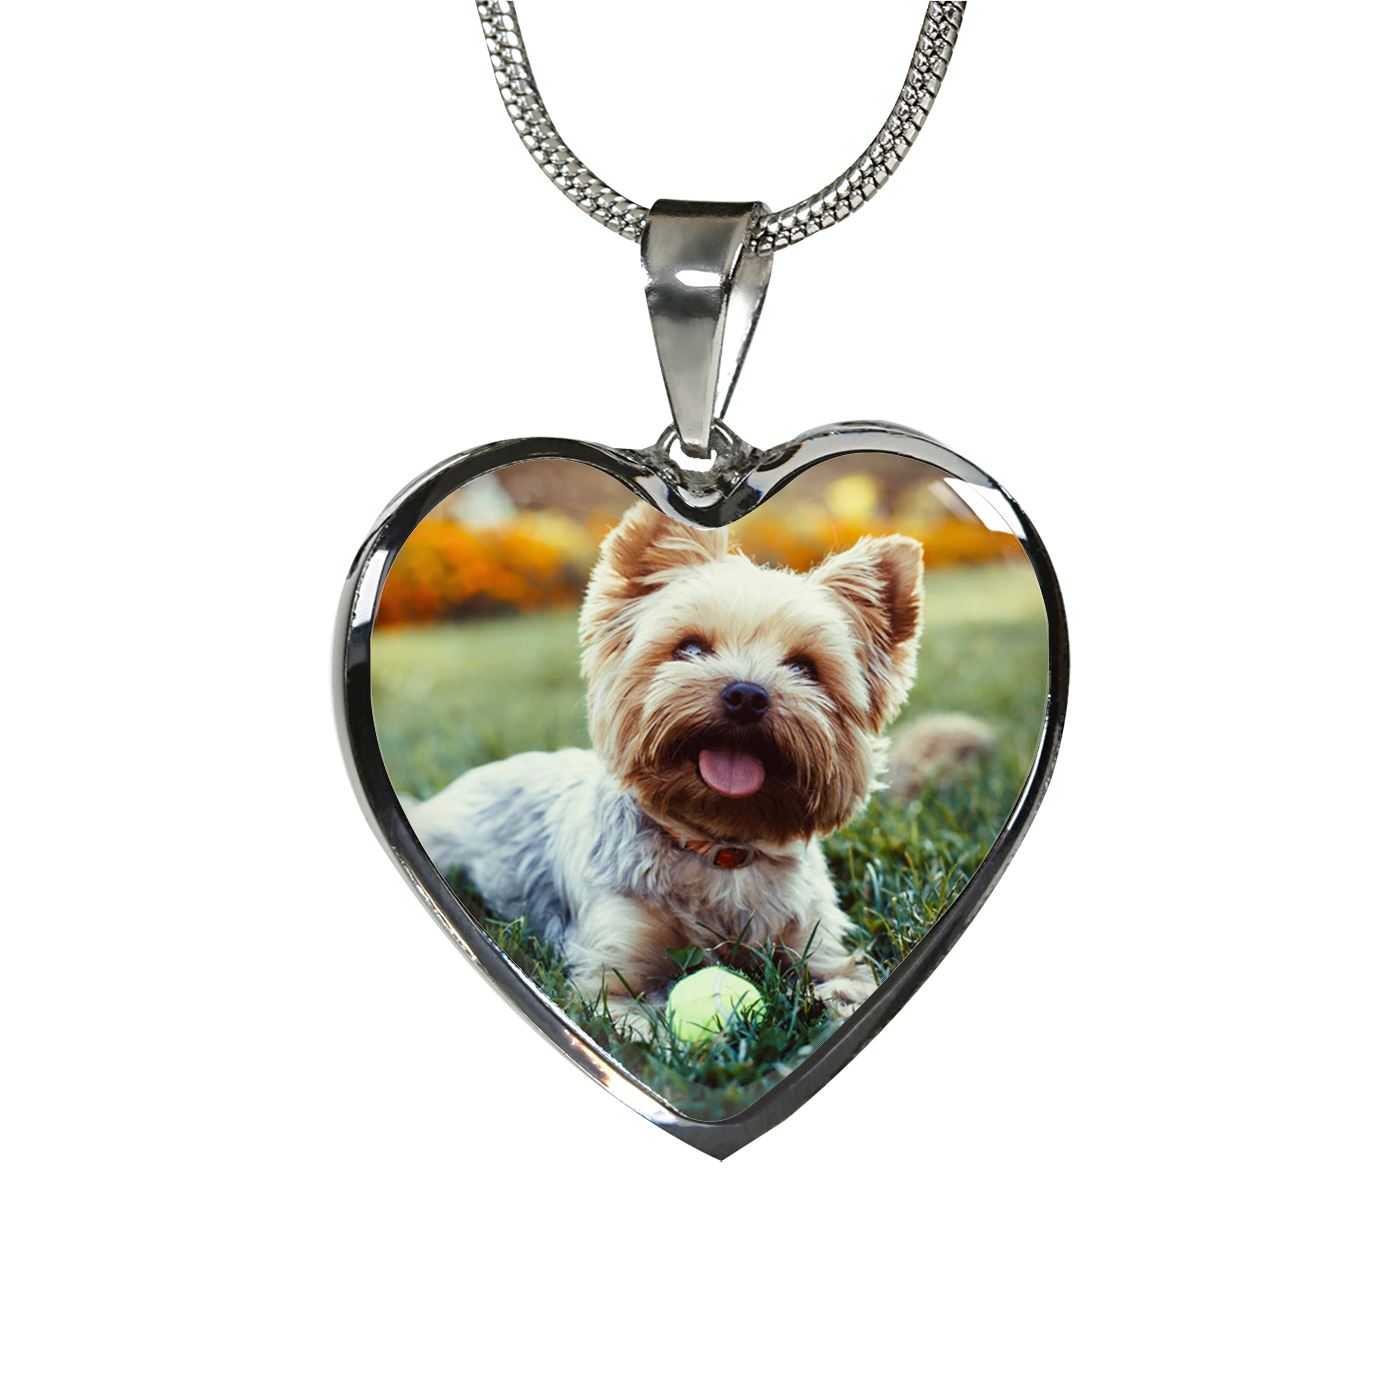 Share The Love For Your Furry Friend With Our Customizable Dog Lover Necklace Jewelry Luxury Necklace (Silver) No 